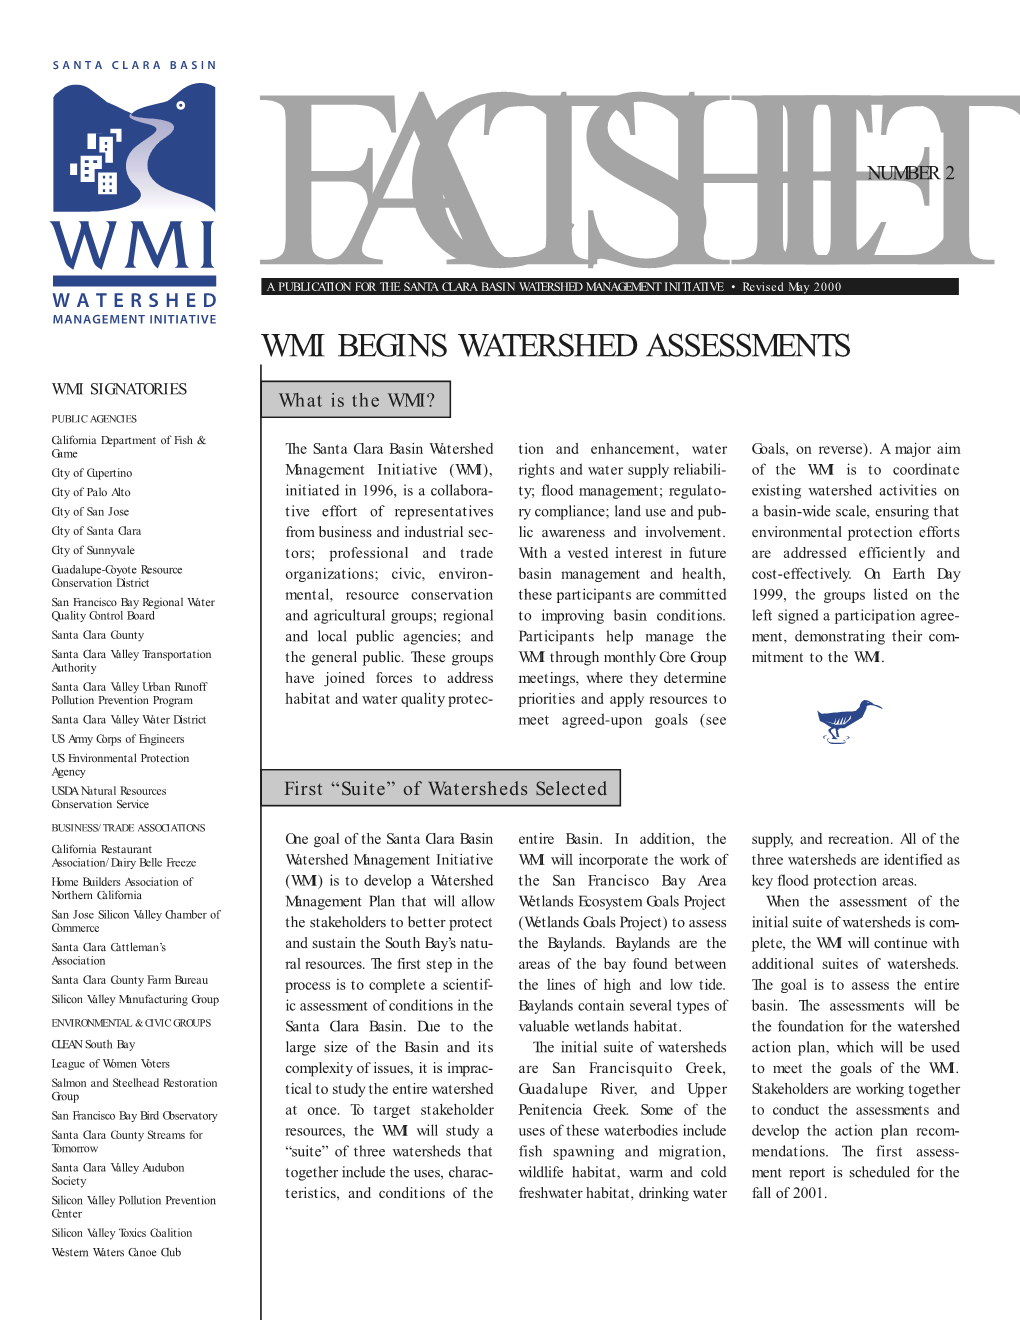 Wmi Begins Watershed Assessments